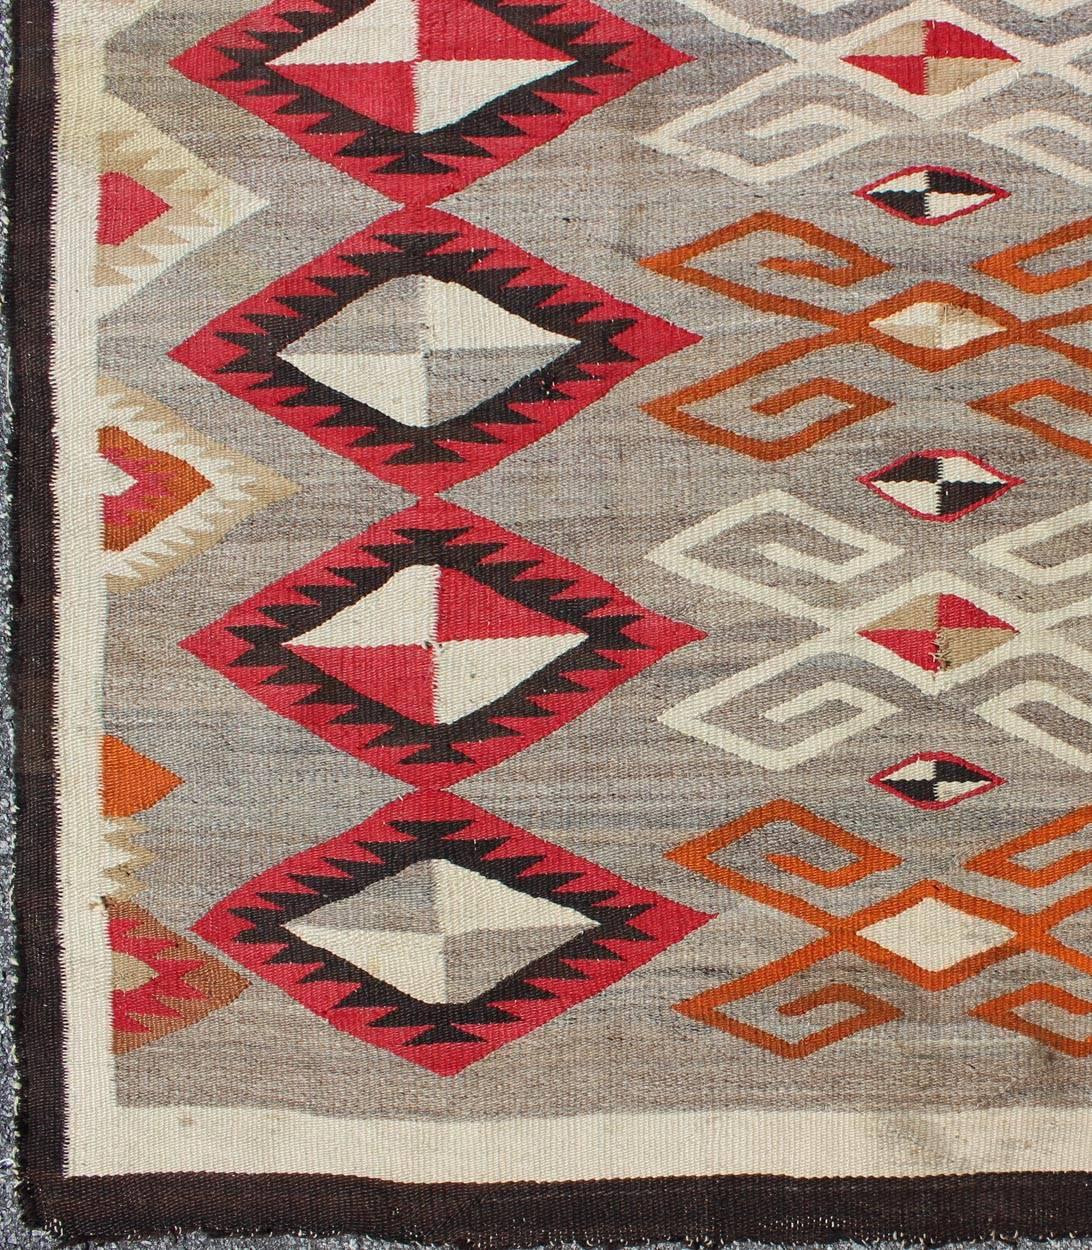 This intriguing antique Navajo rug was woven in the United States during the first half of the 20th century. The exciting and unique composition boasts a captivating geometric composition with an all-over diamond design. The range of colors includes